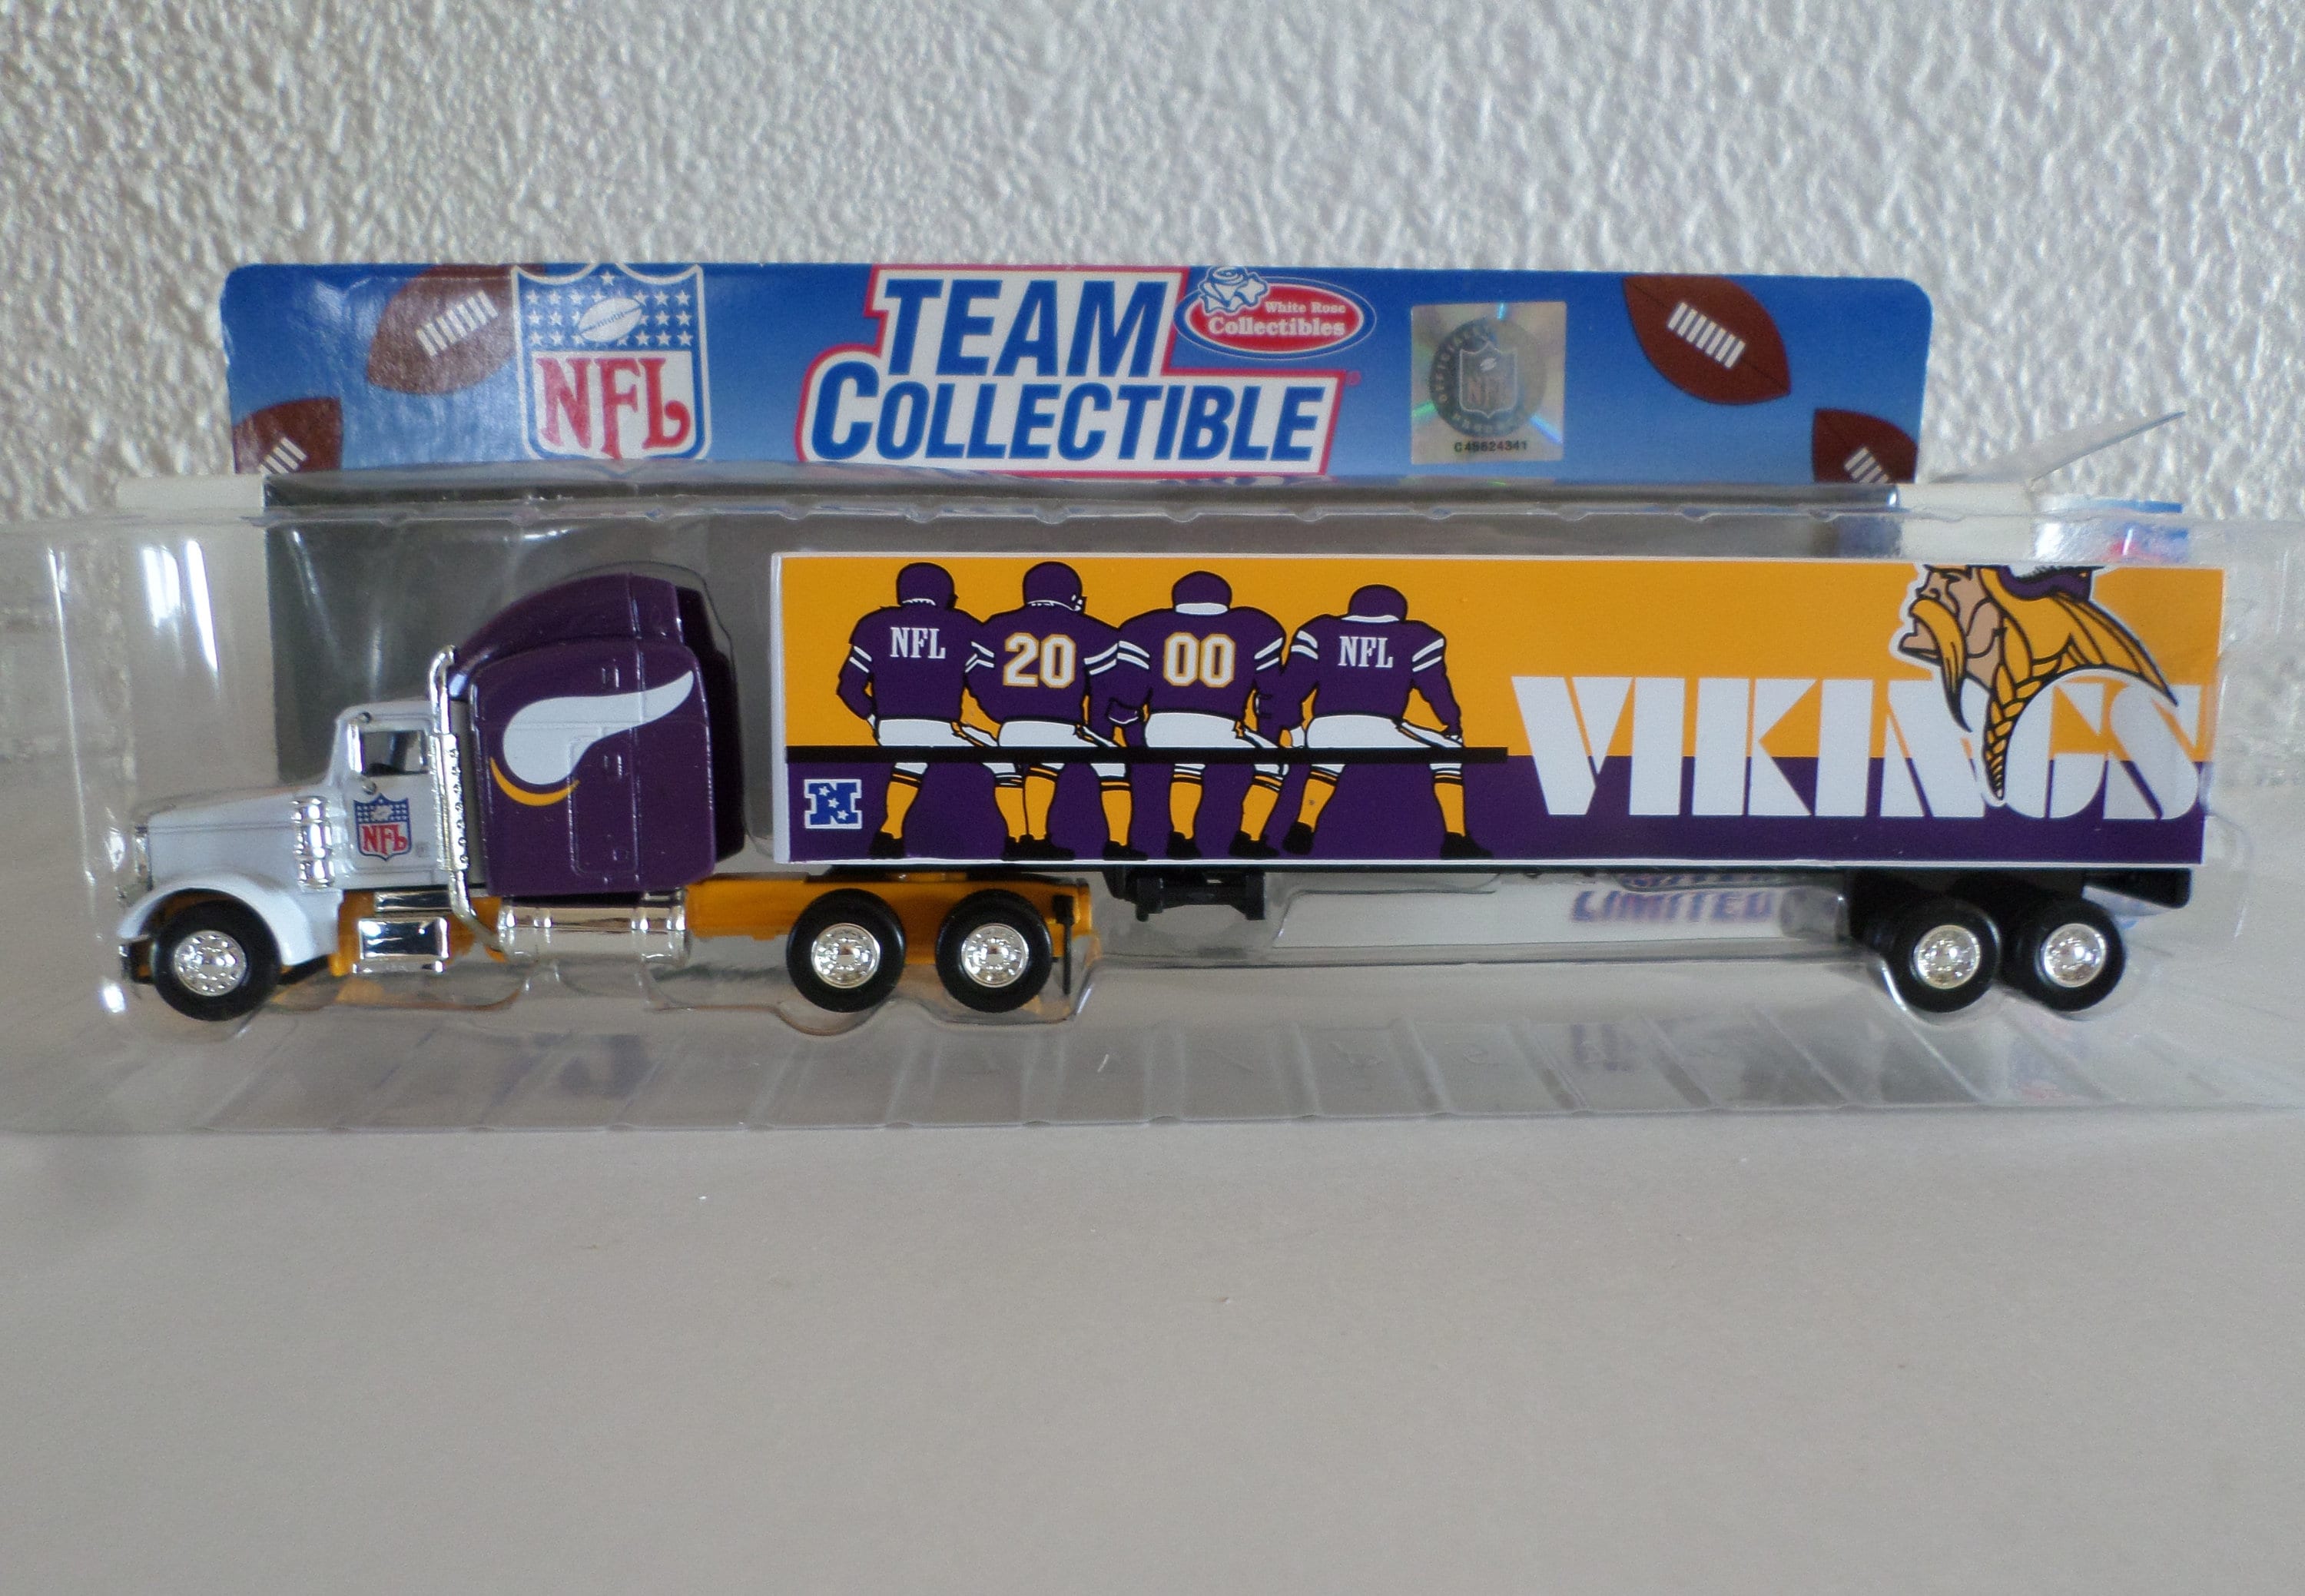 Vintage Vikings NFL Team Collectible Semi Truck Tractor 